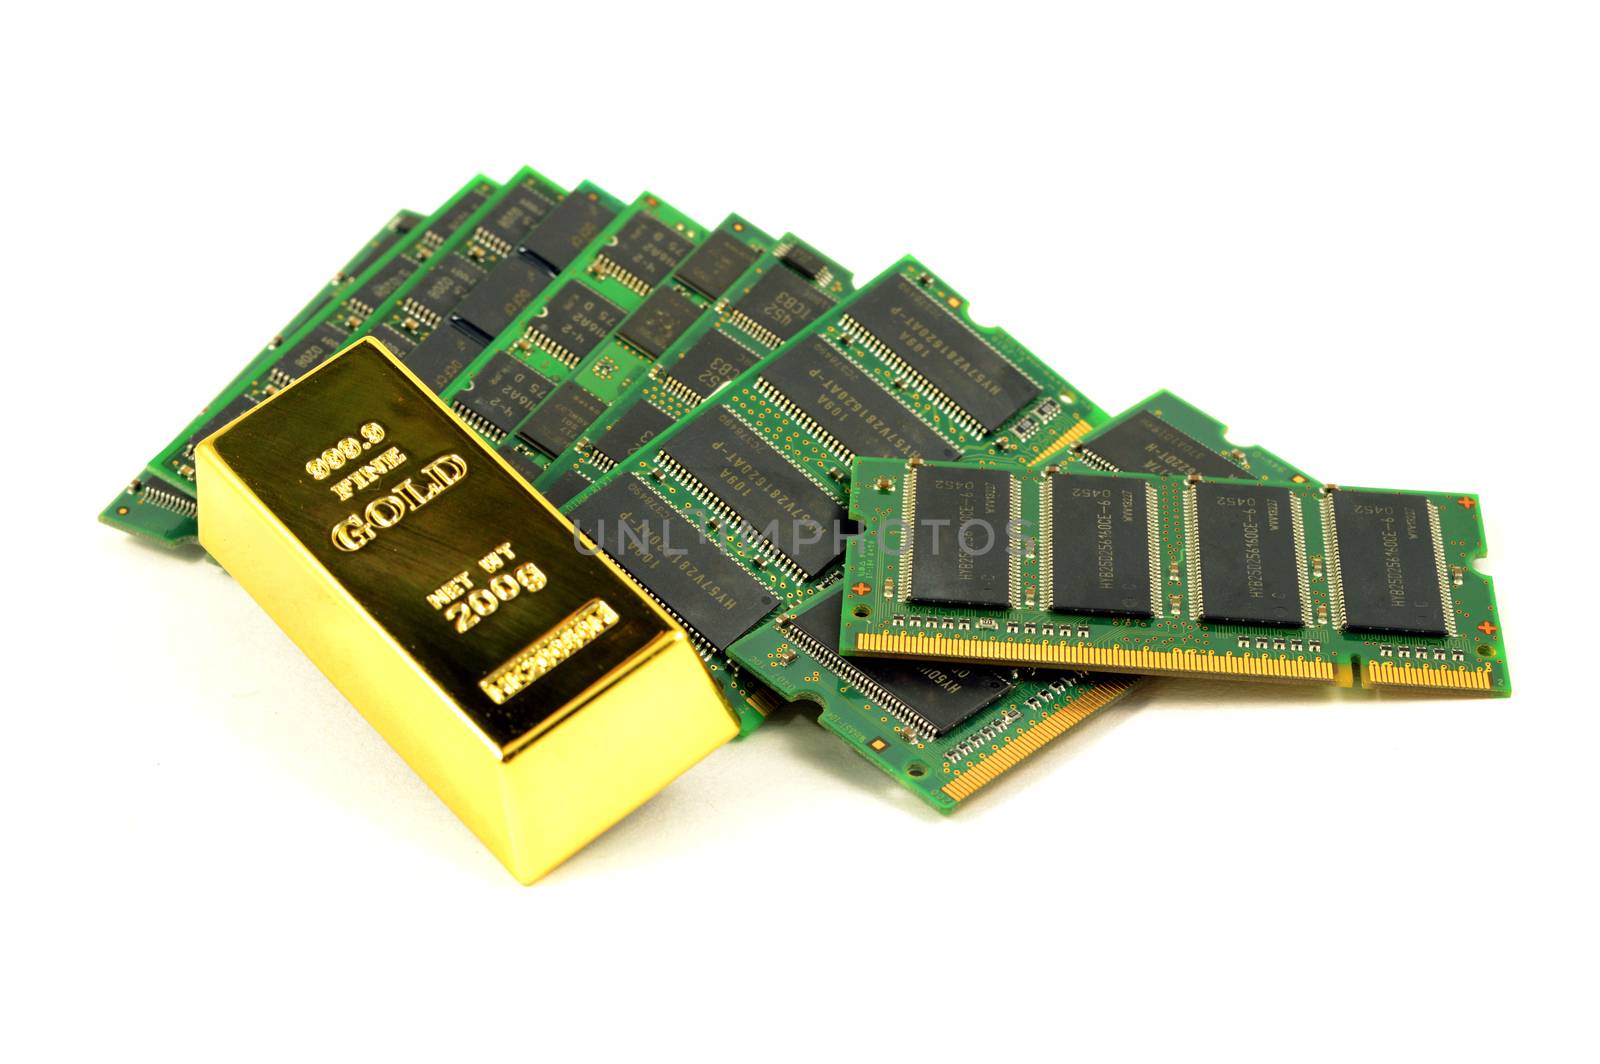 A pile of scrap computer RAM chips with a pure gold bullion bar to show that the precious metal can be recovered from electronic waste.